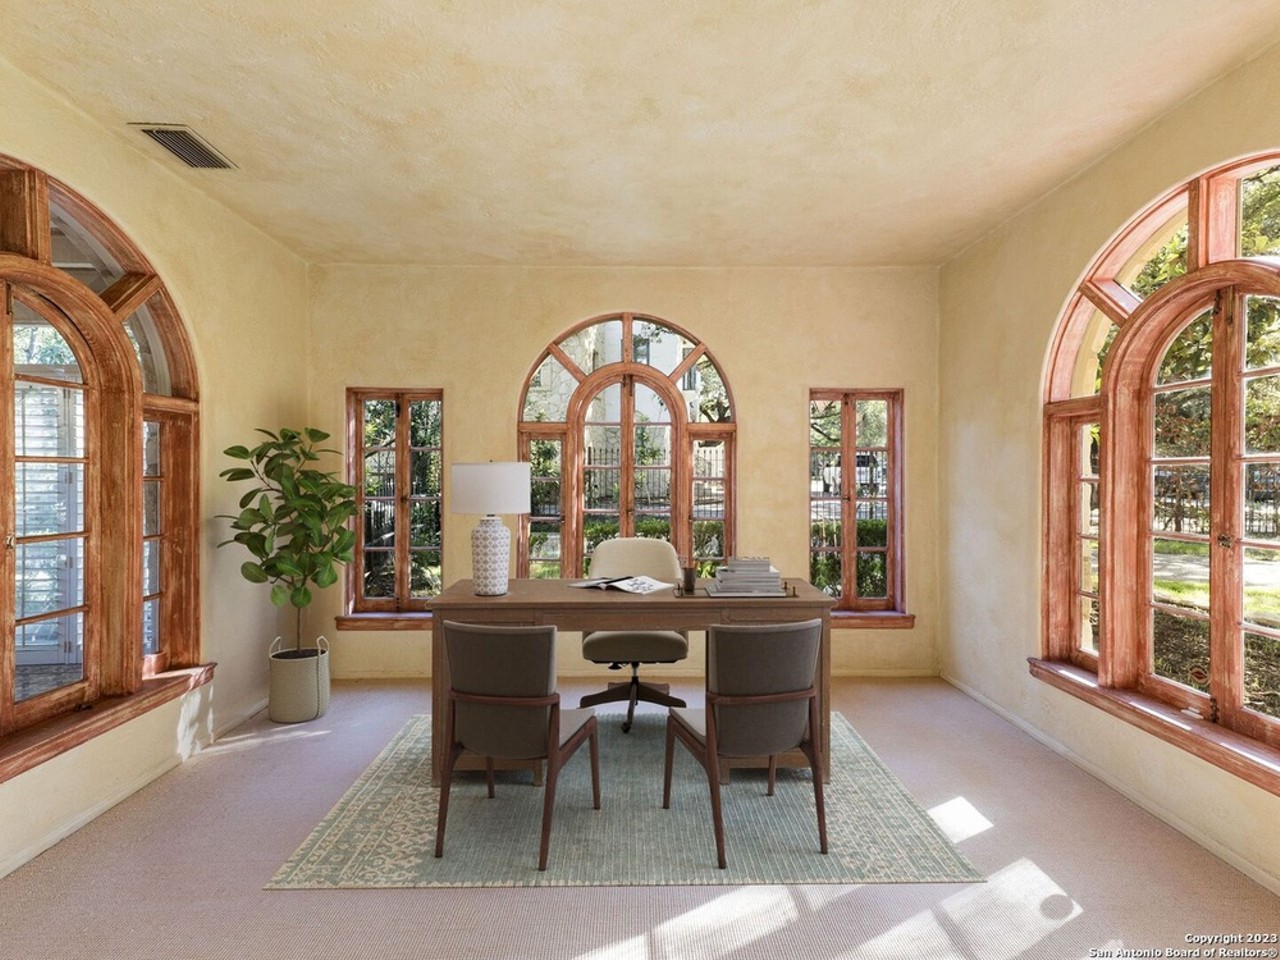 An historic Olmos Park home built by San Antonio real-estate magnate H.C. Thorman is for sale